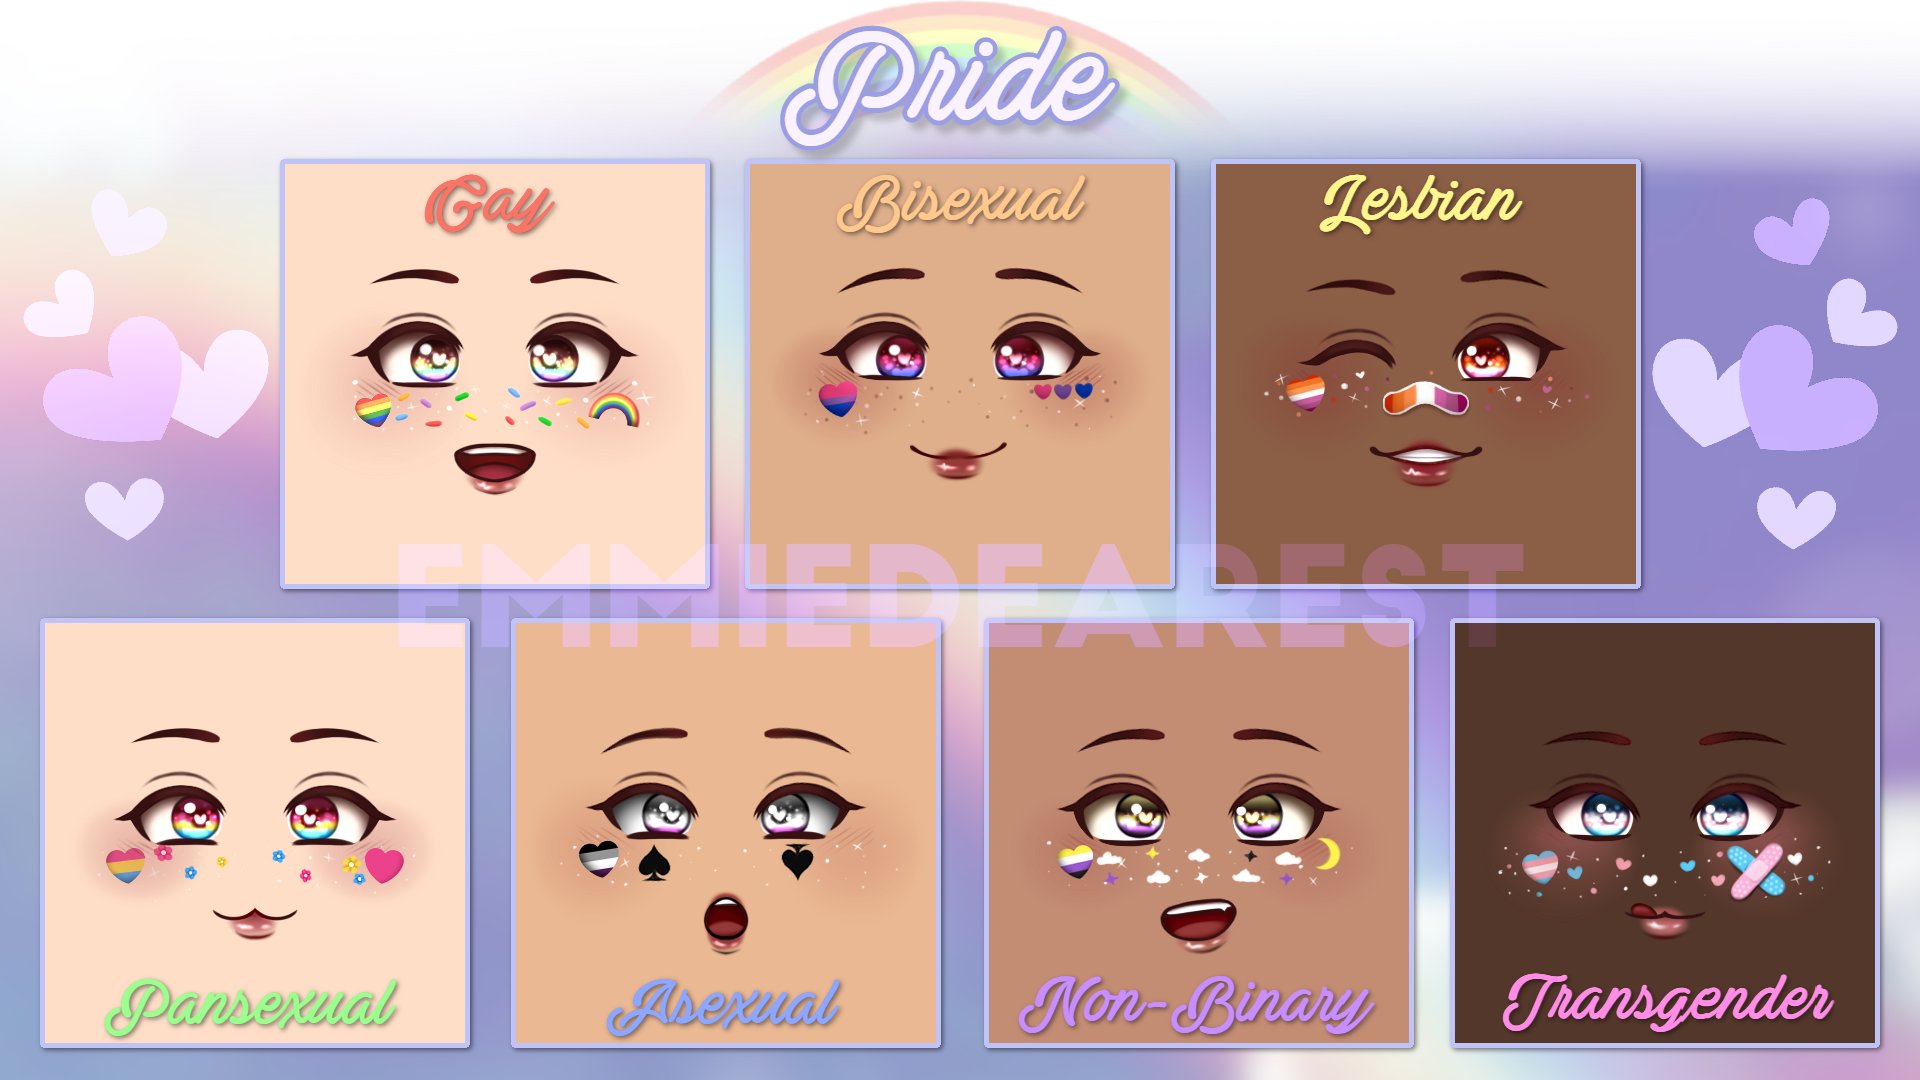 ｅｍｍｉｅ On Twitter Be Proud Here Is My 2020 Pride Makeup Collection That I Tried To Make Gender Neutral For All To Wear I Hope You Enjoy I Hope - roblox binary